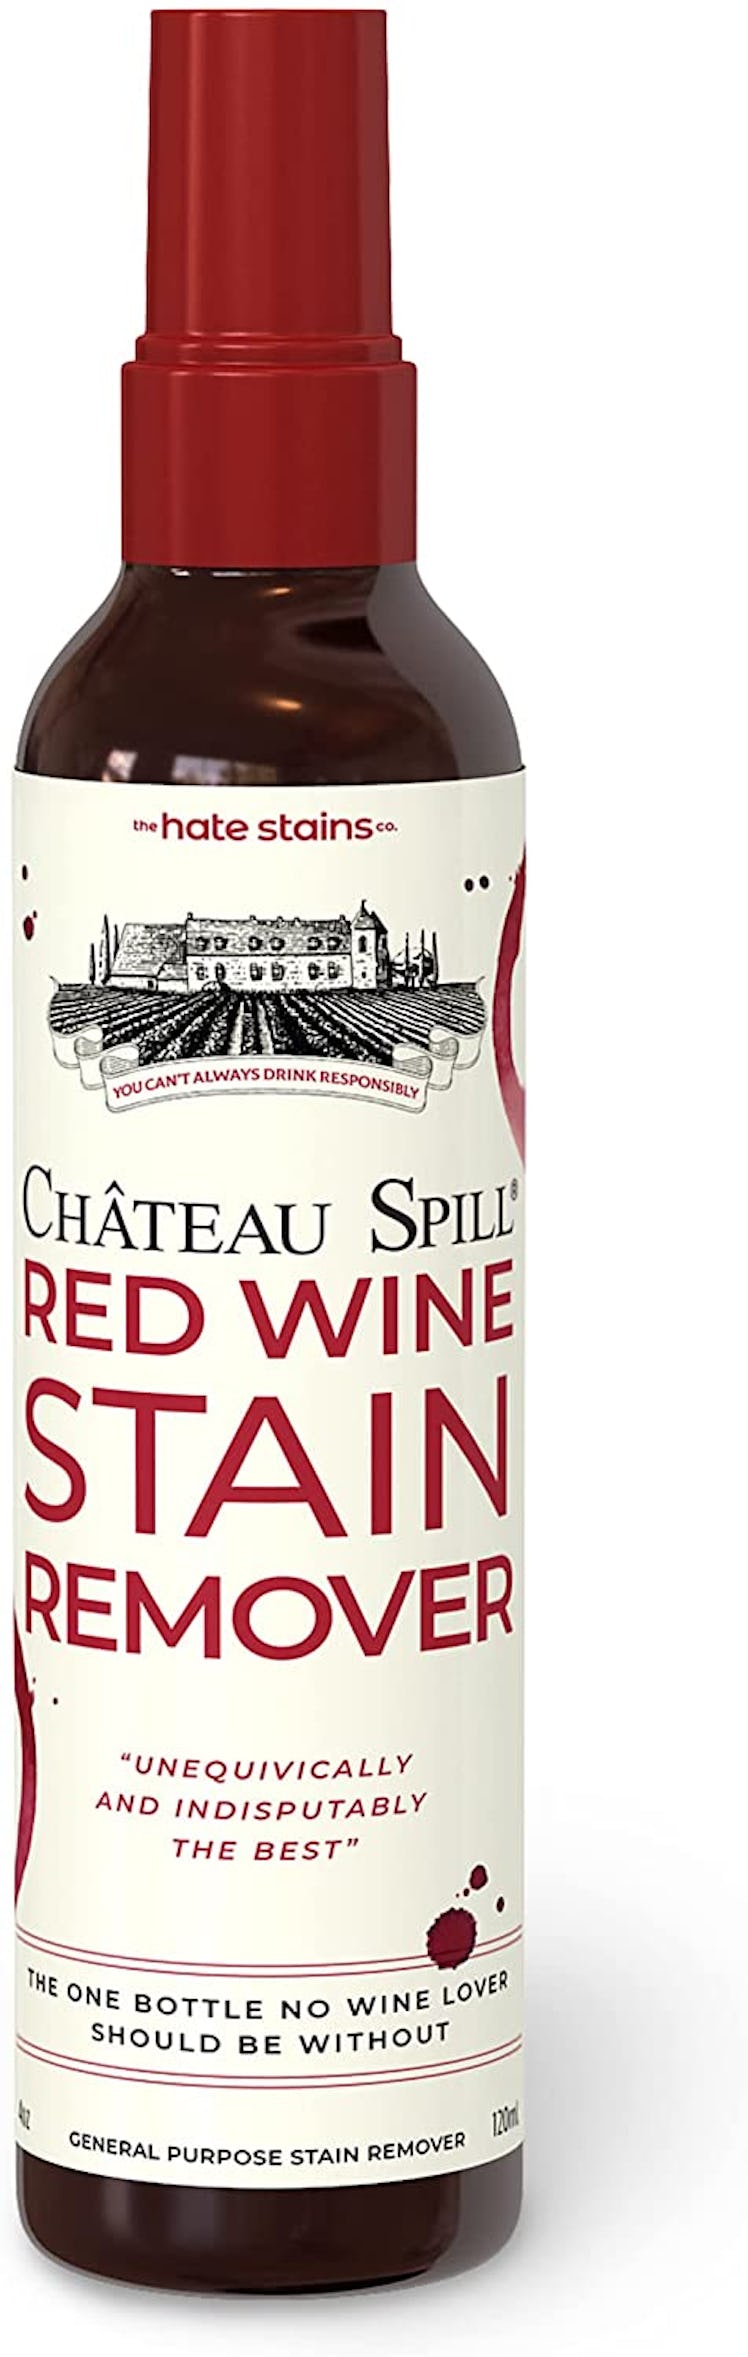 Chateau Spill Stain Remover